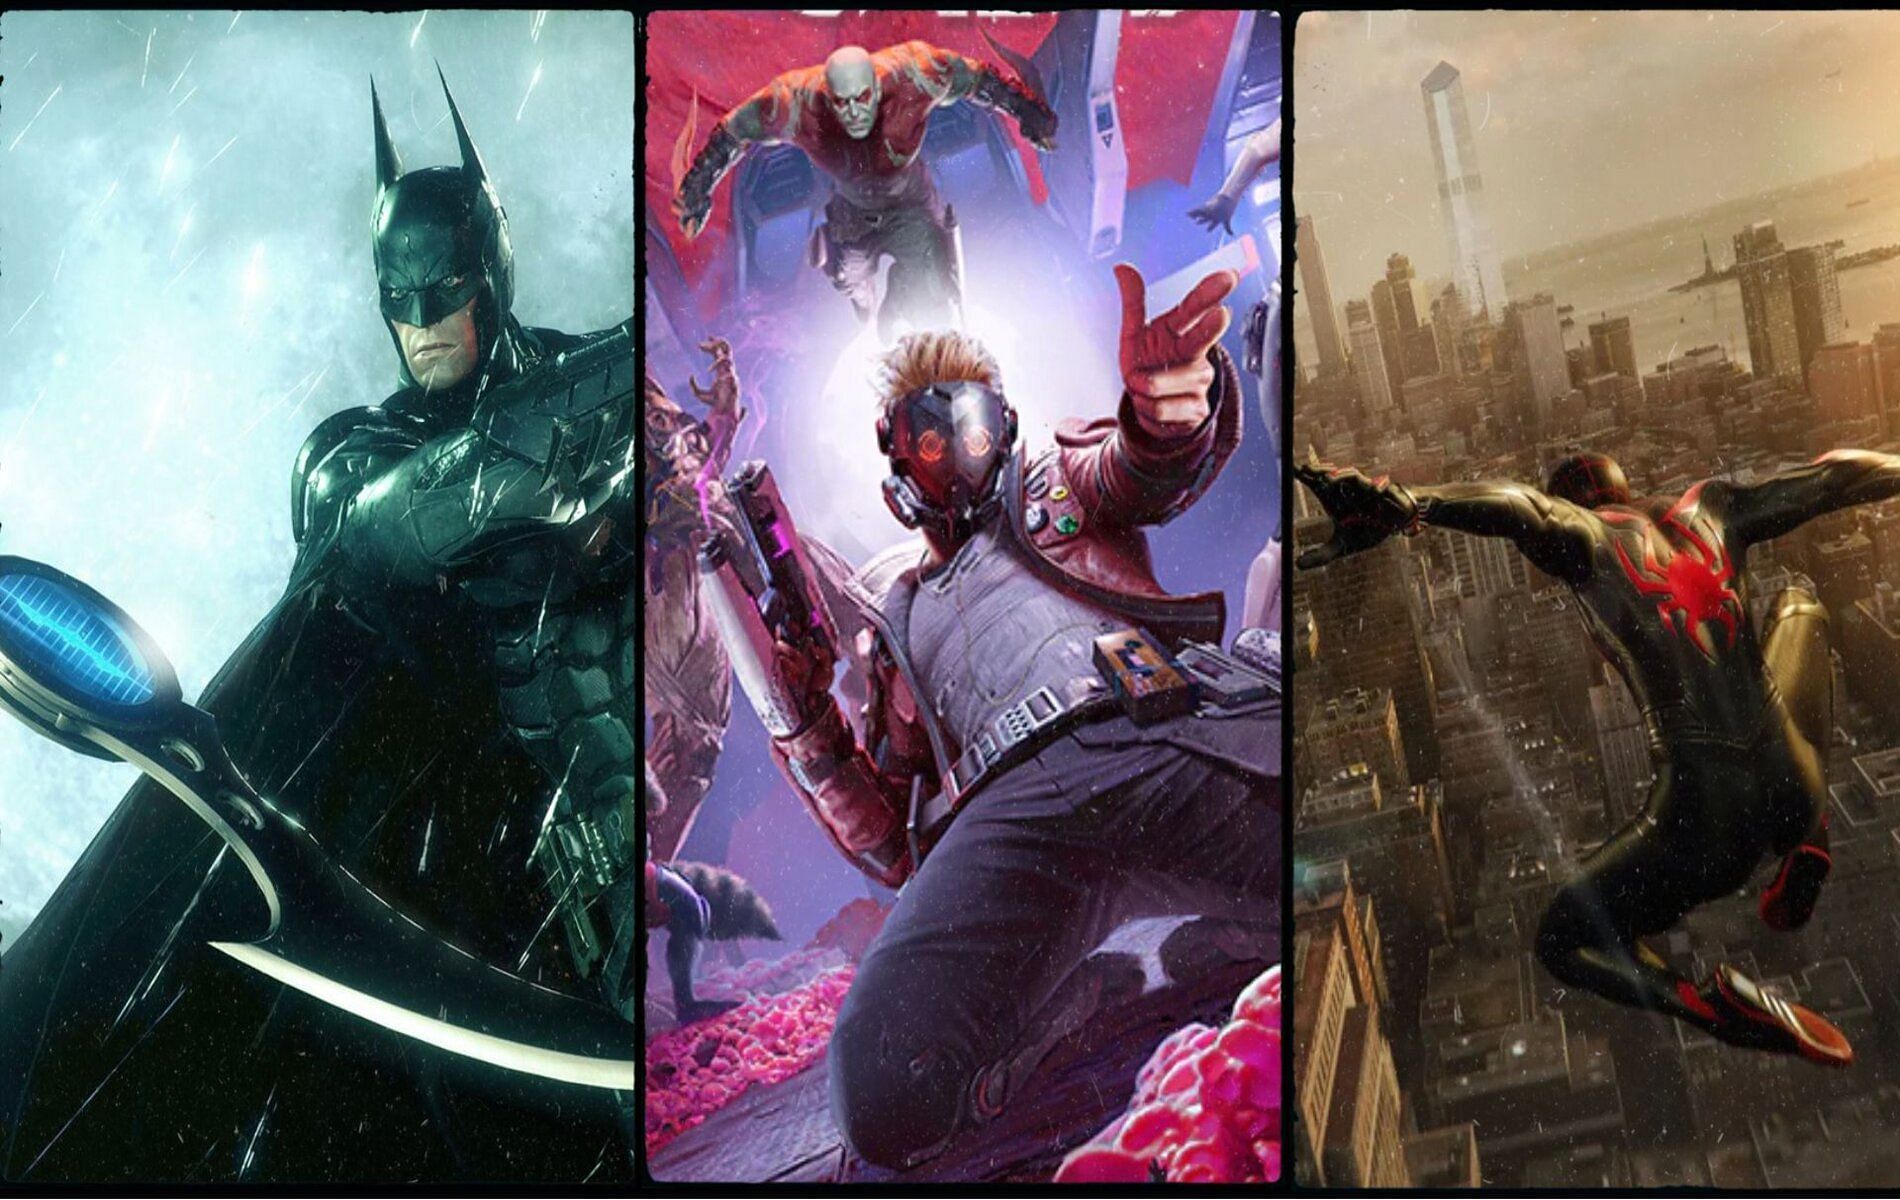 Screenshots and Cover art from Batman Arkham , Guardians of the Galaxy and Spiderman 2